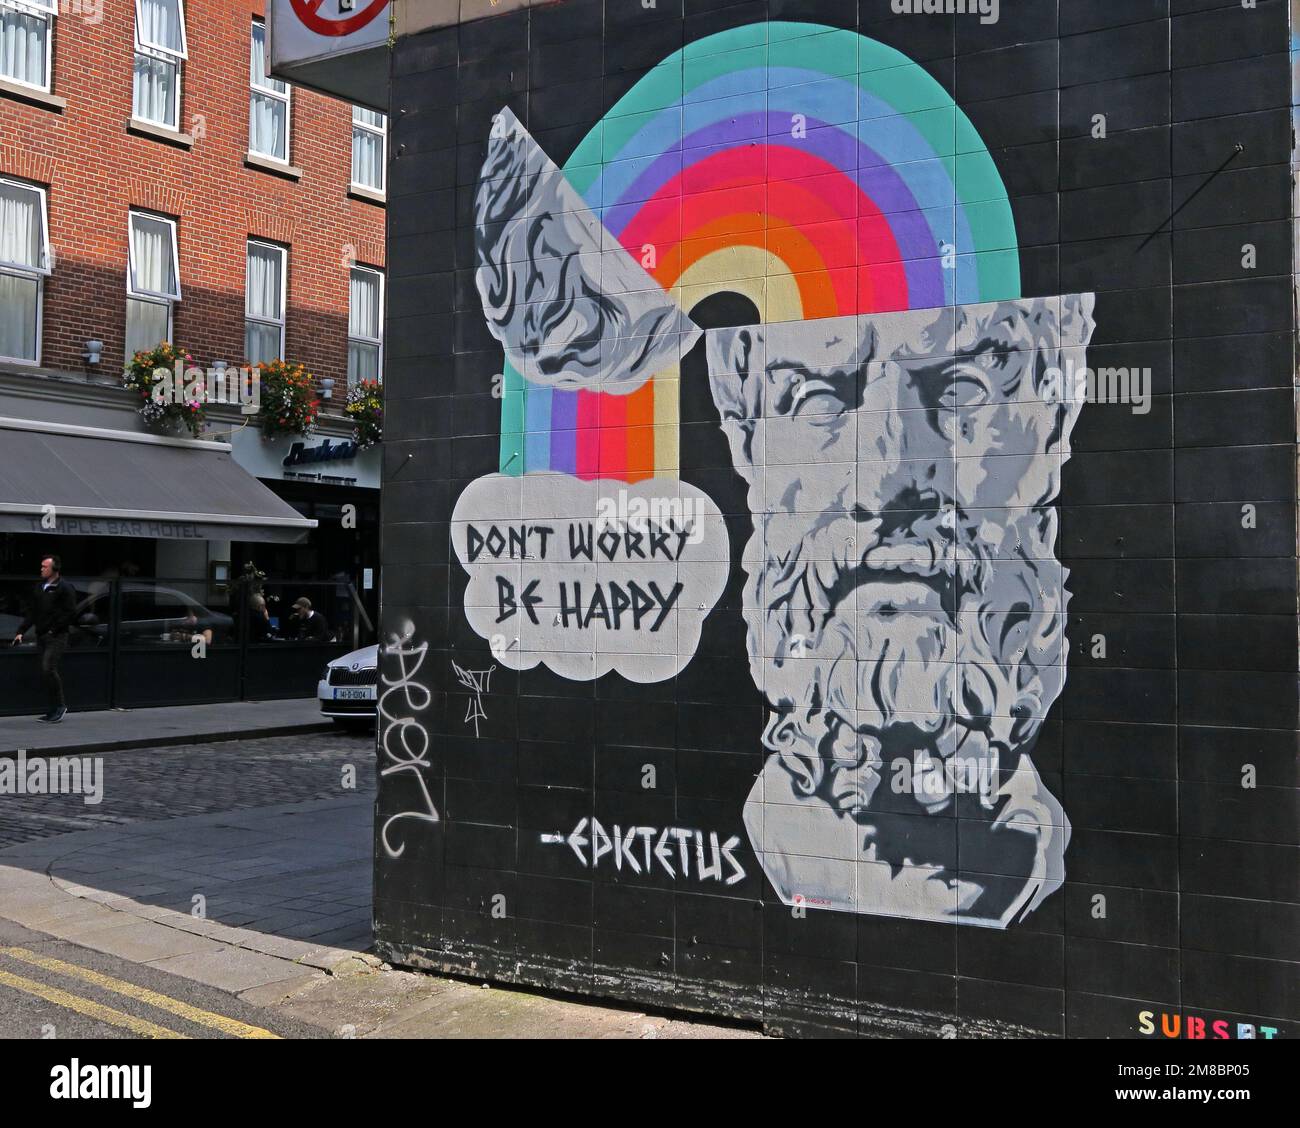 Dont worry, be happy, a quote from Epktetus, Epictetus, graffito on a Dublin wall, rainbow emerging from the mind Stock Photo